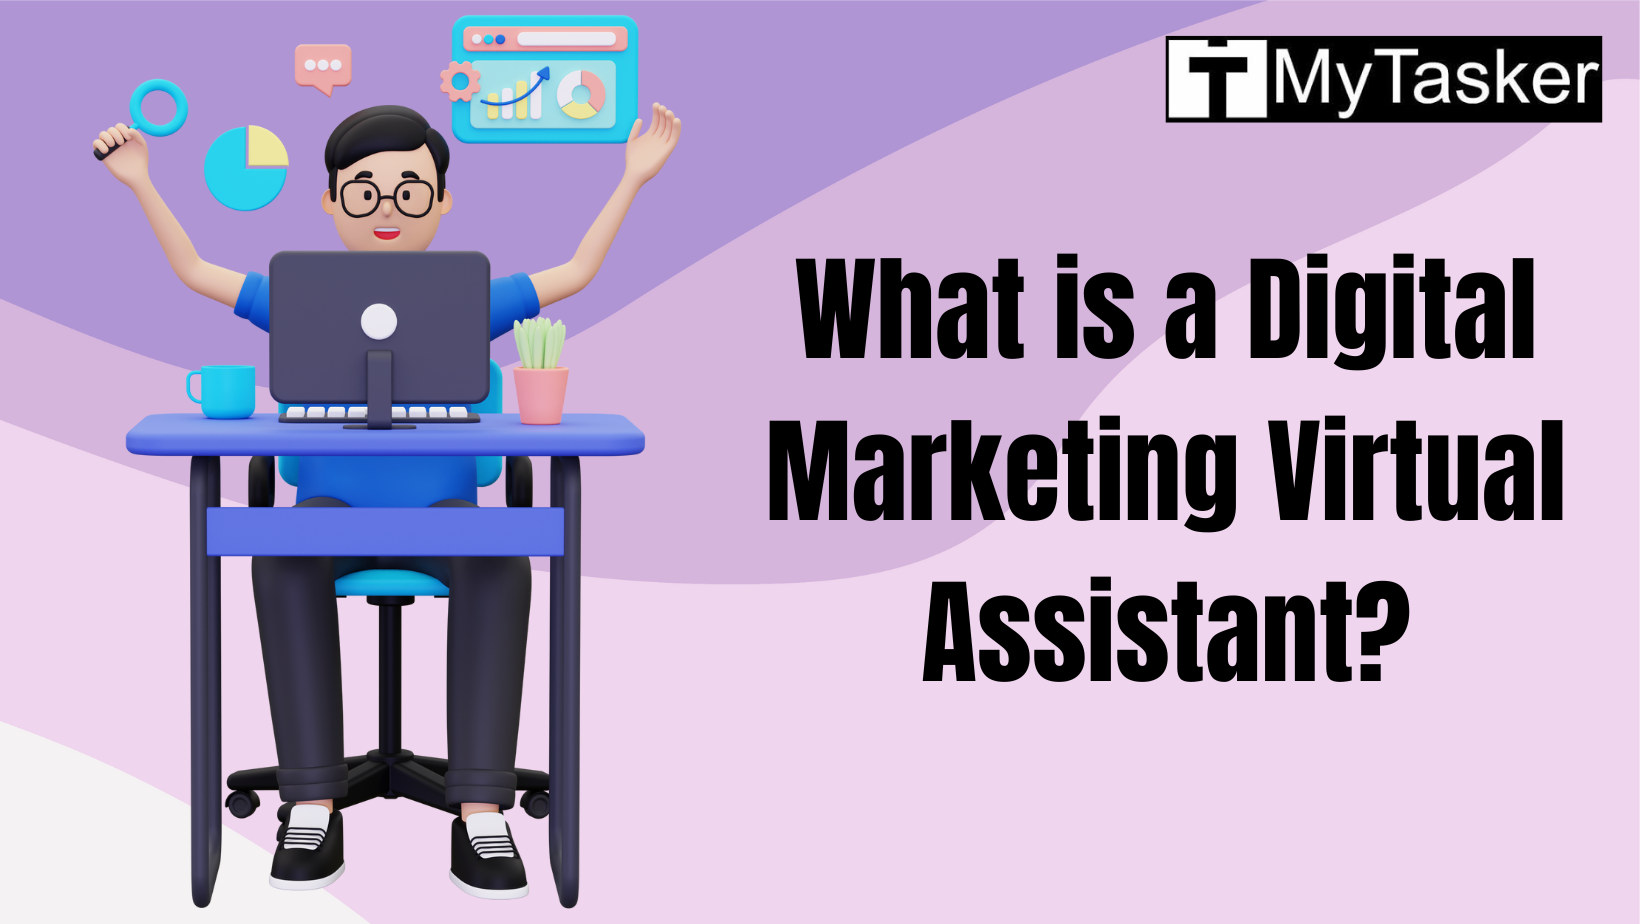 What is a Digital Marketing Virtual Assistant?